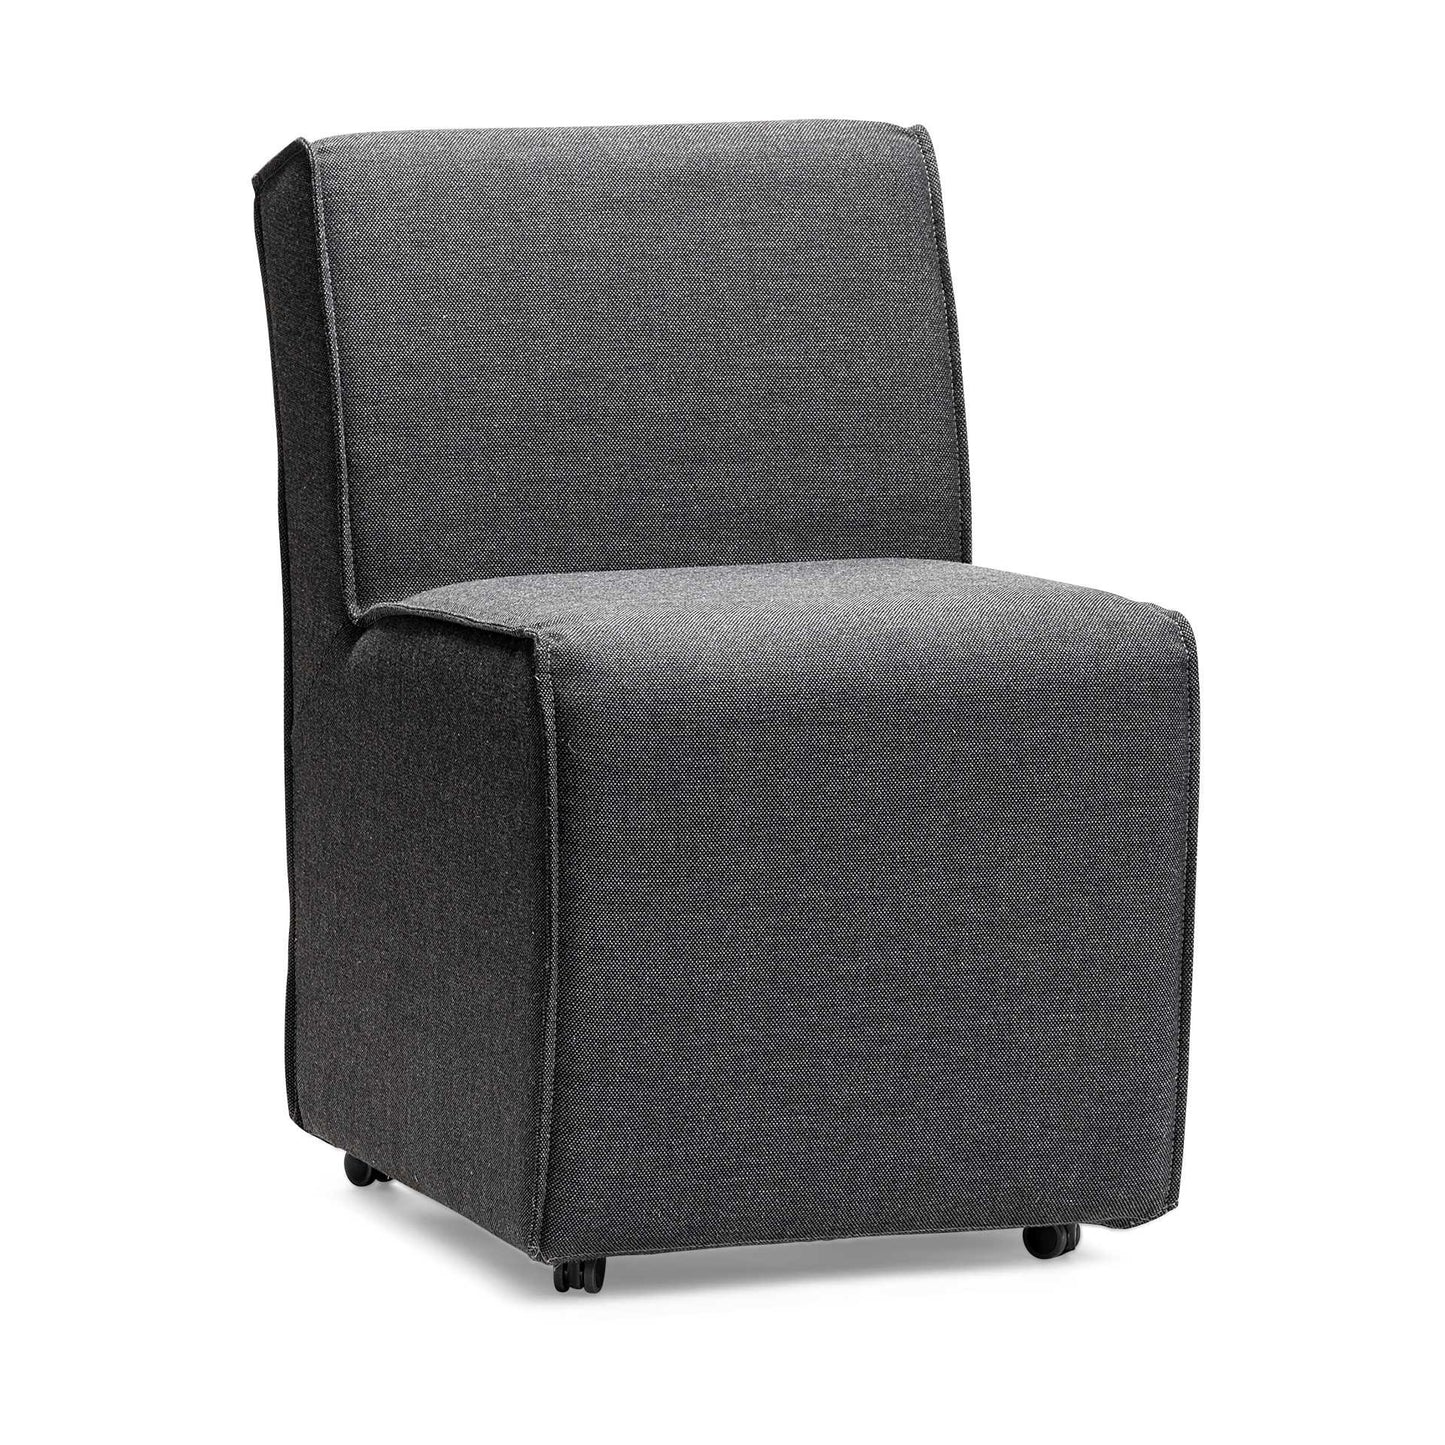 Set of Two Gray Upholstered Fabric Dining Side Chairs With Wheels